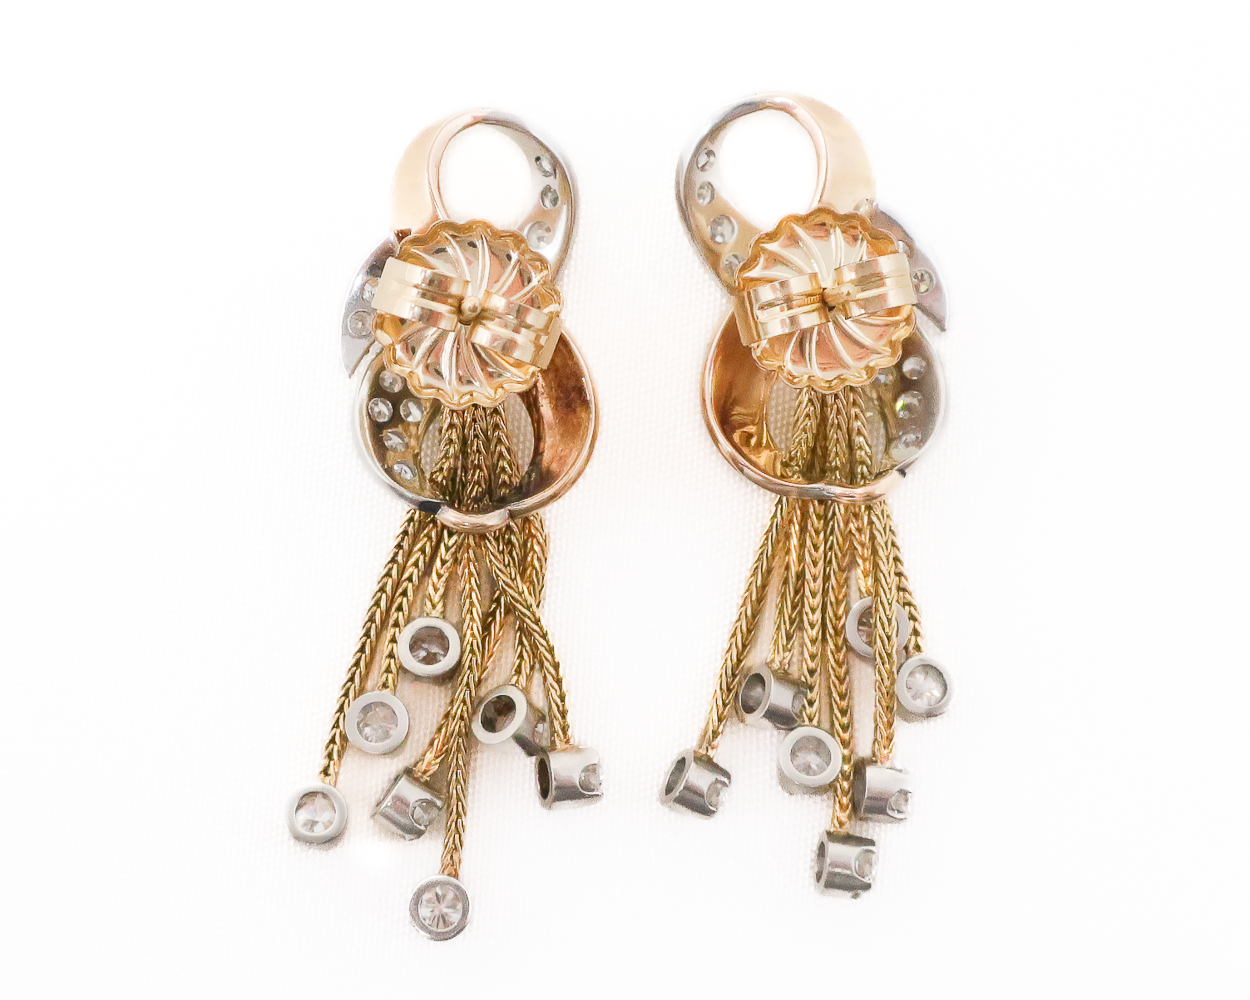 Midcentury Diamond Earrings with Gold Tassels — Isadoras Antique Jewelry